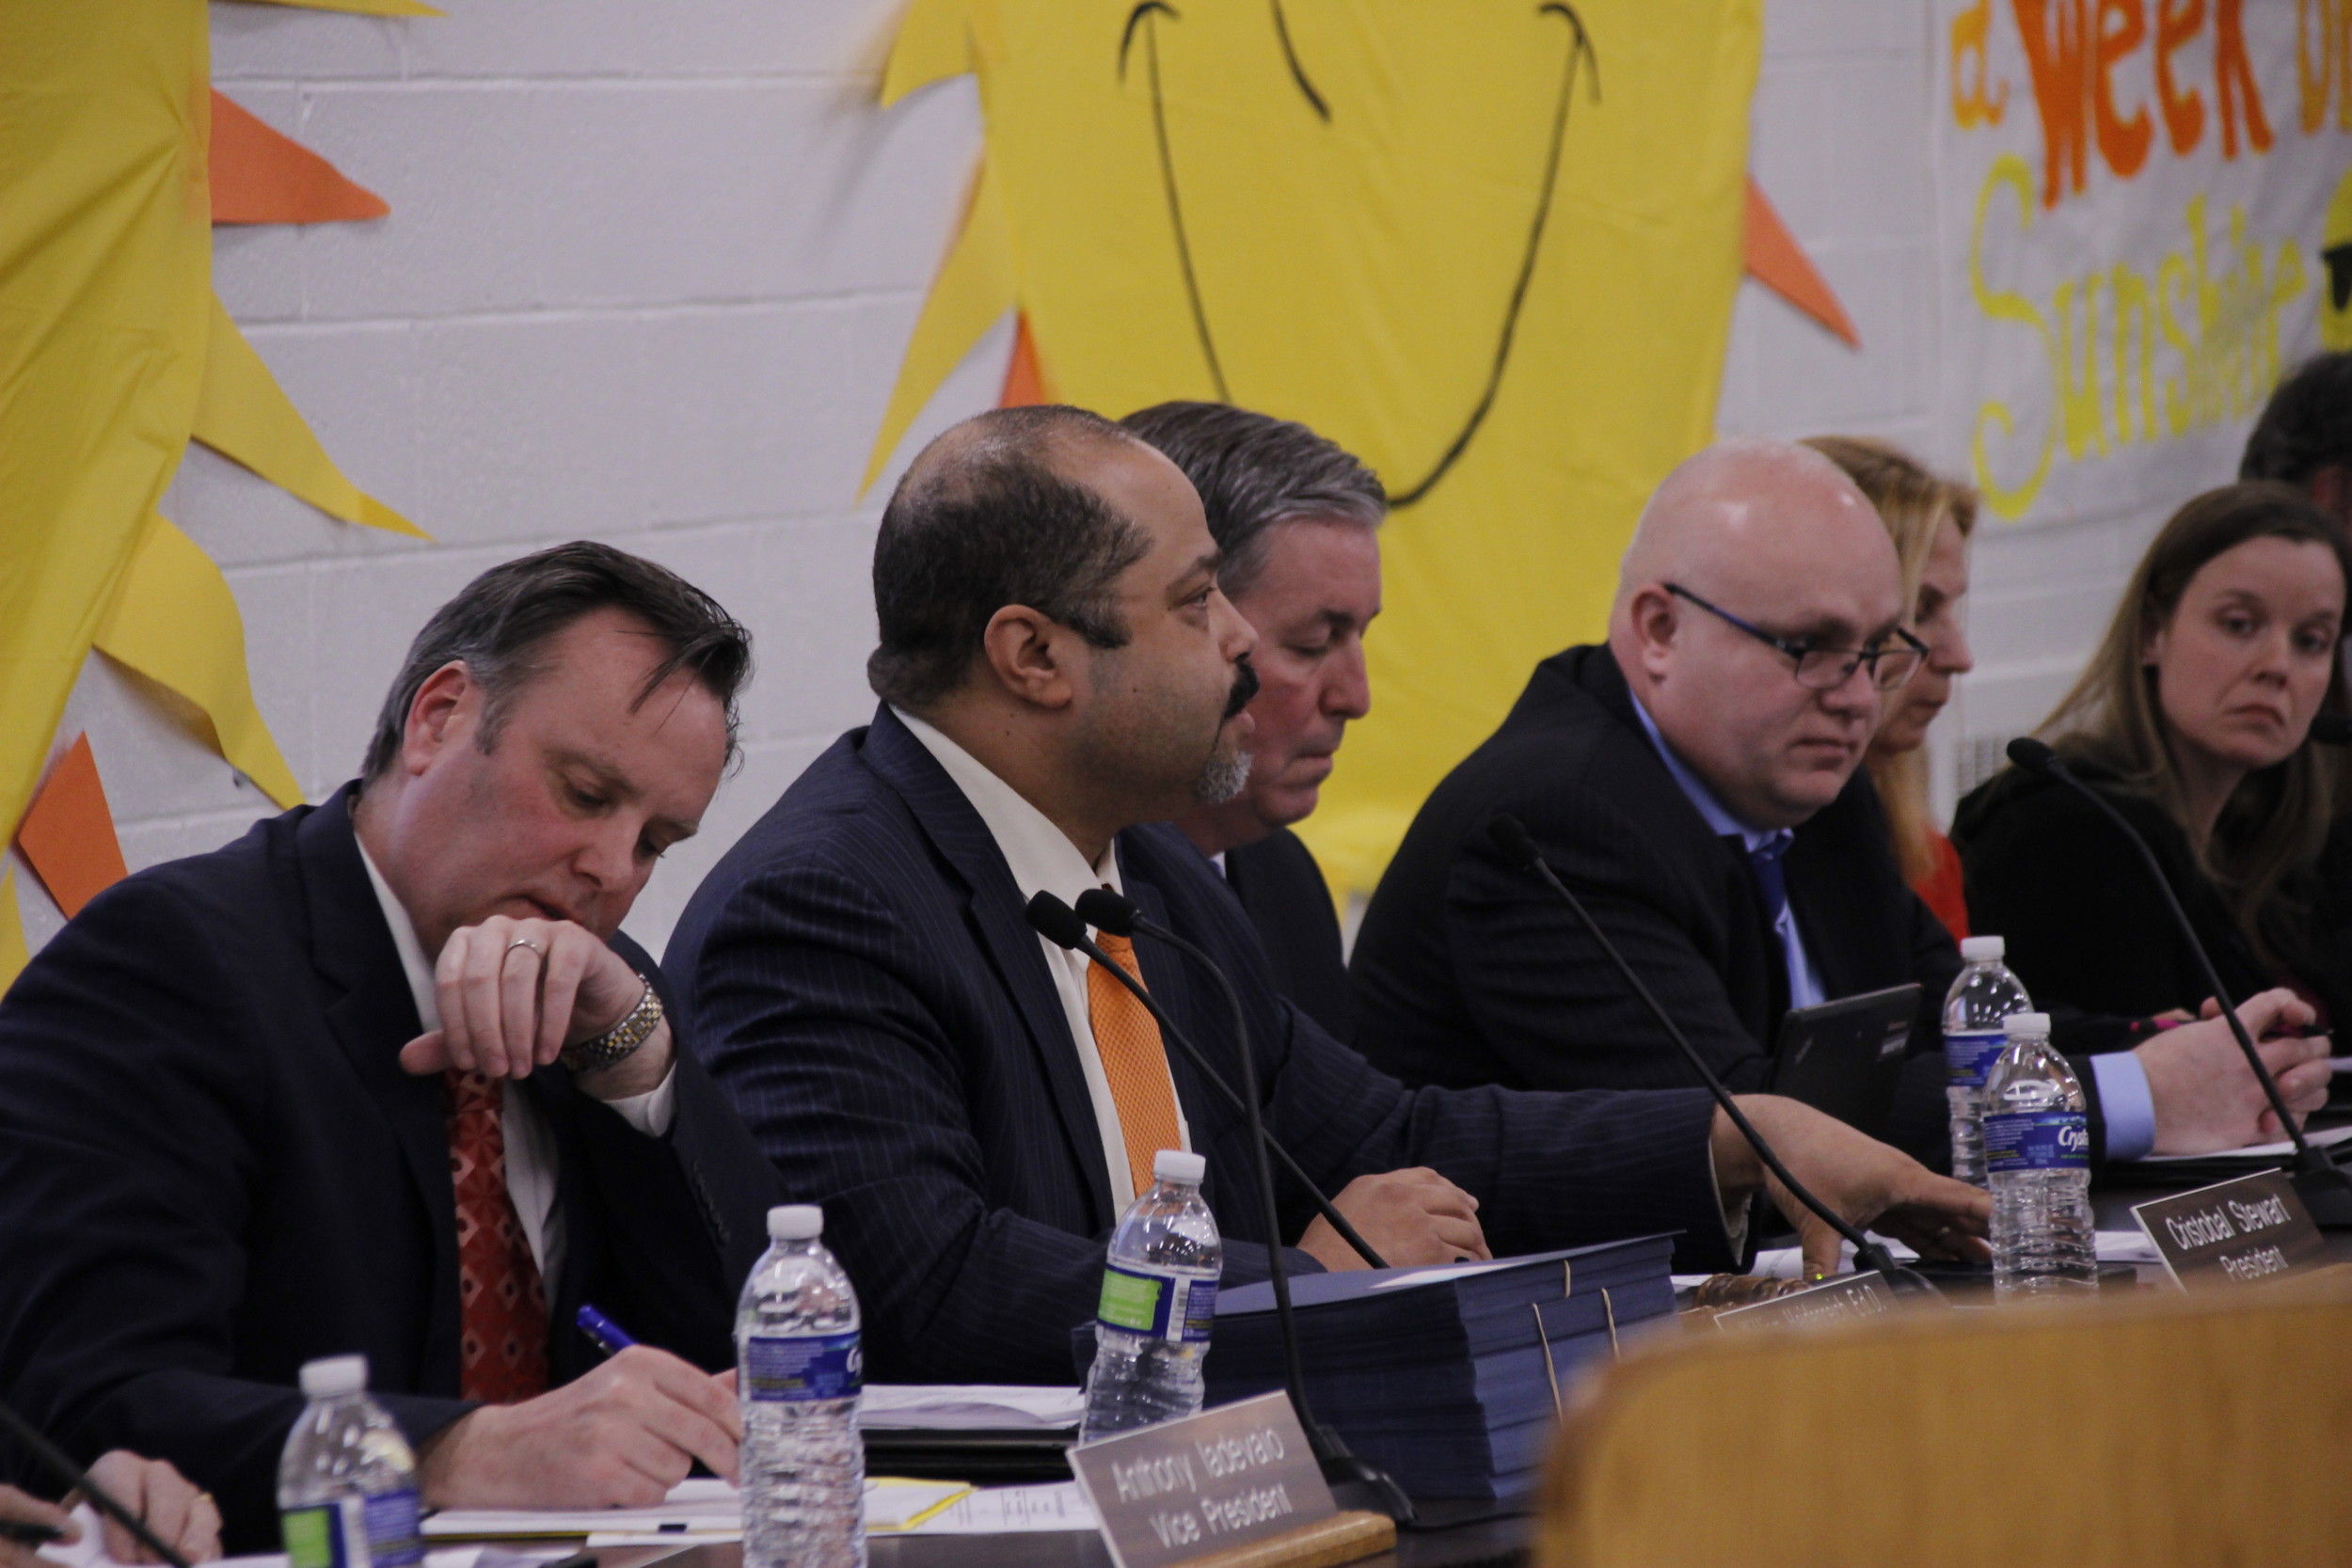 Cristobal Stewart, second from left, at a Board of Education meeting in February.